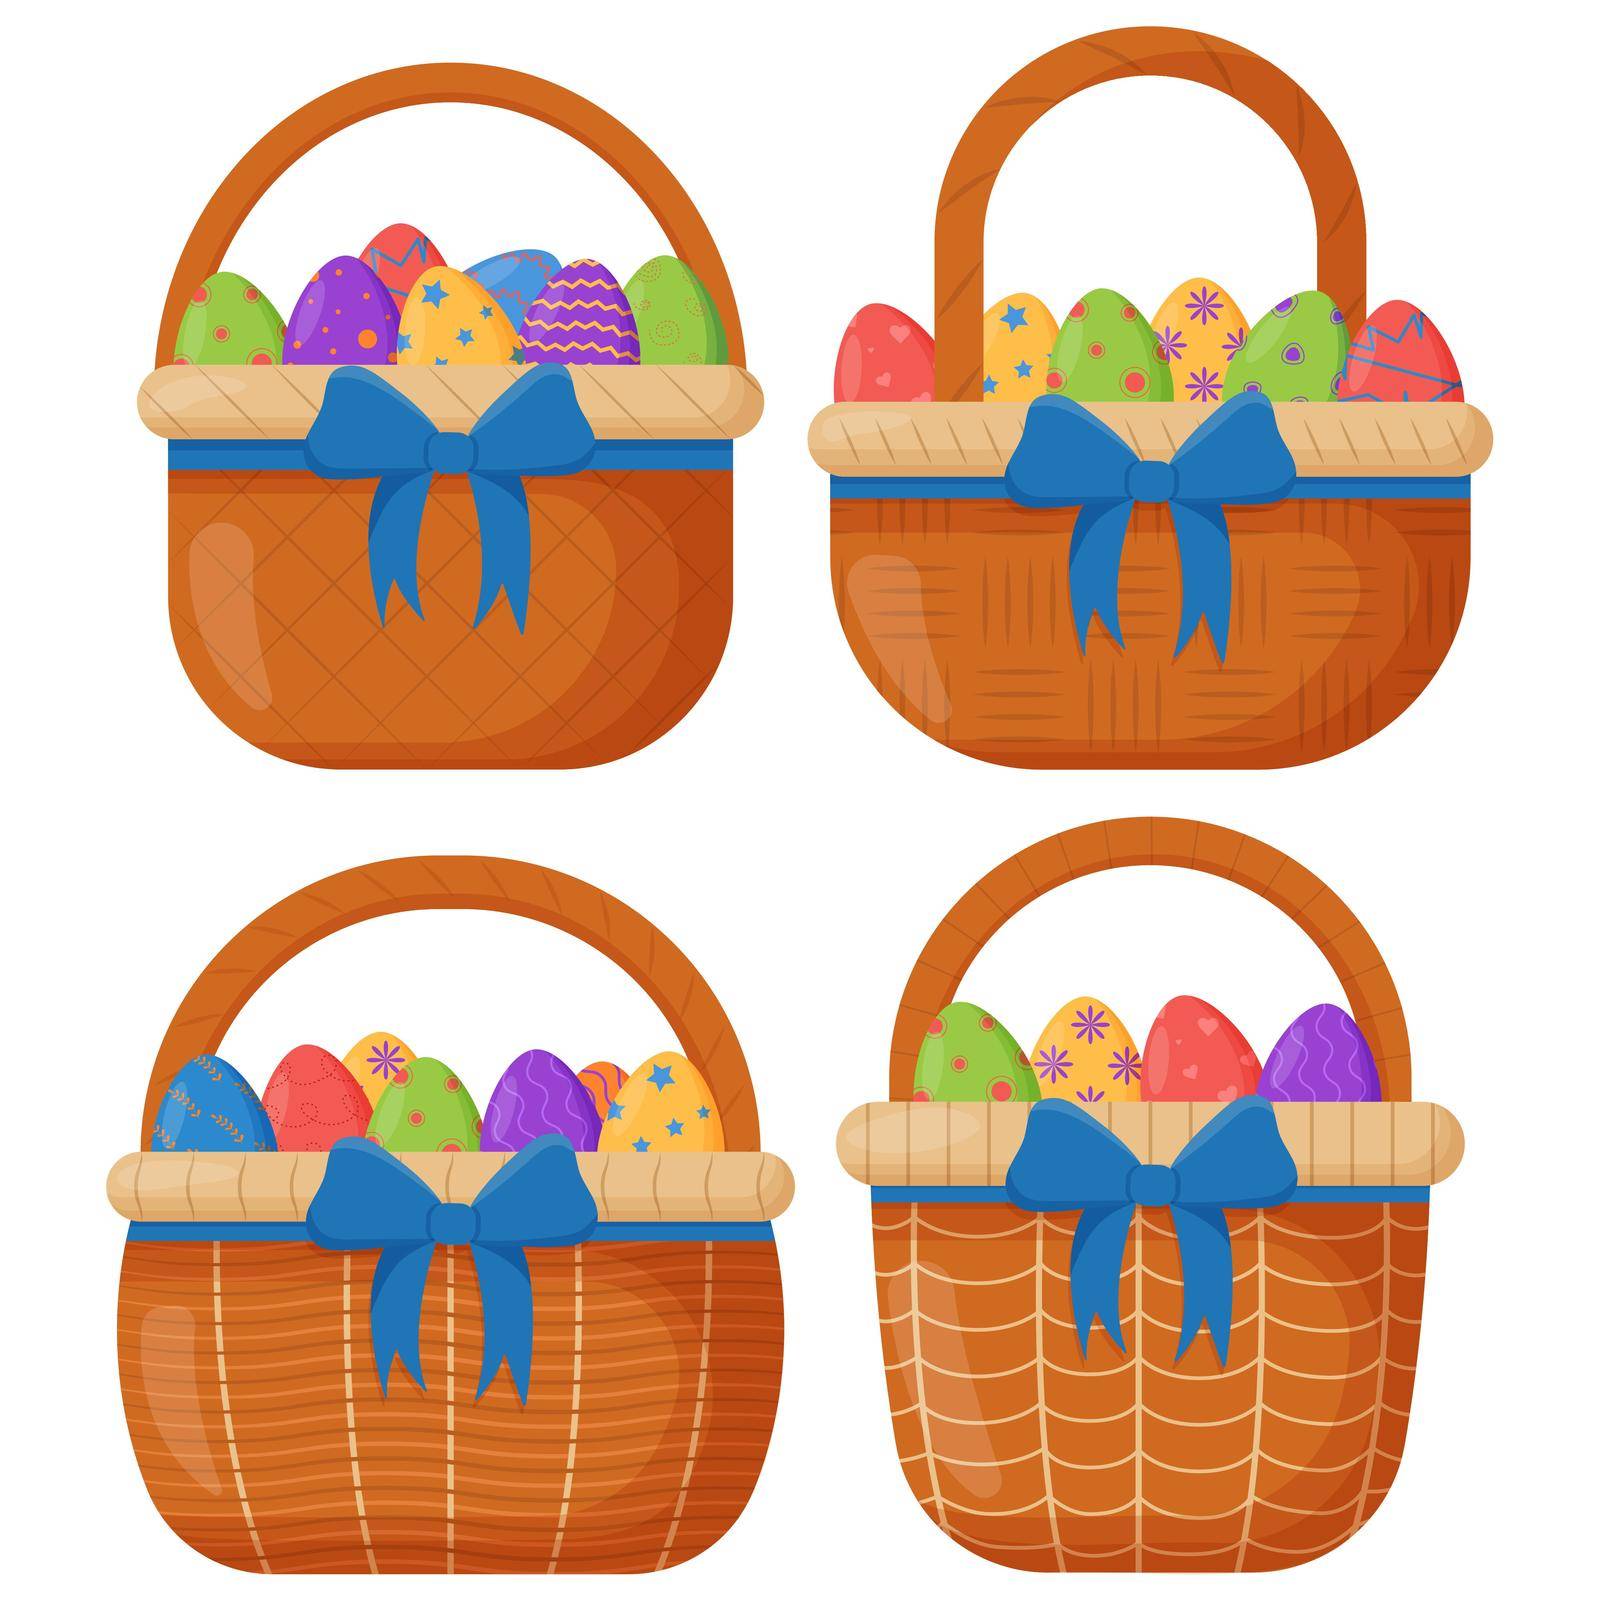 Wicker basket. Wicker basket with Easter eggs for Easter. Wooden accessory for storage or carrying by anna_orlova